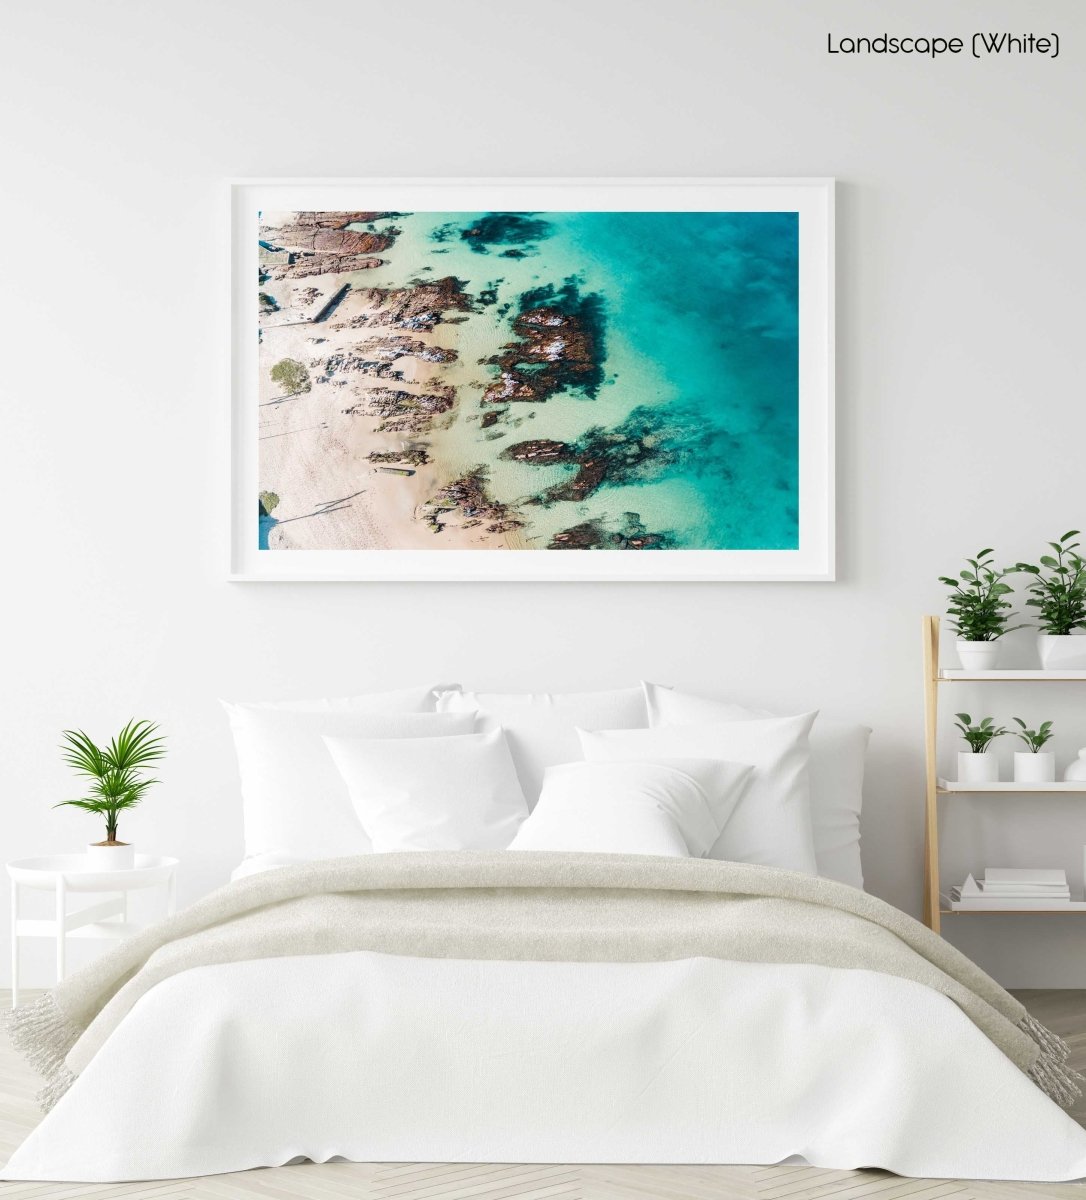 Bright turquoise blue water and rocks along Kalk Bays beach in a white fine art frame